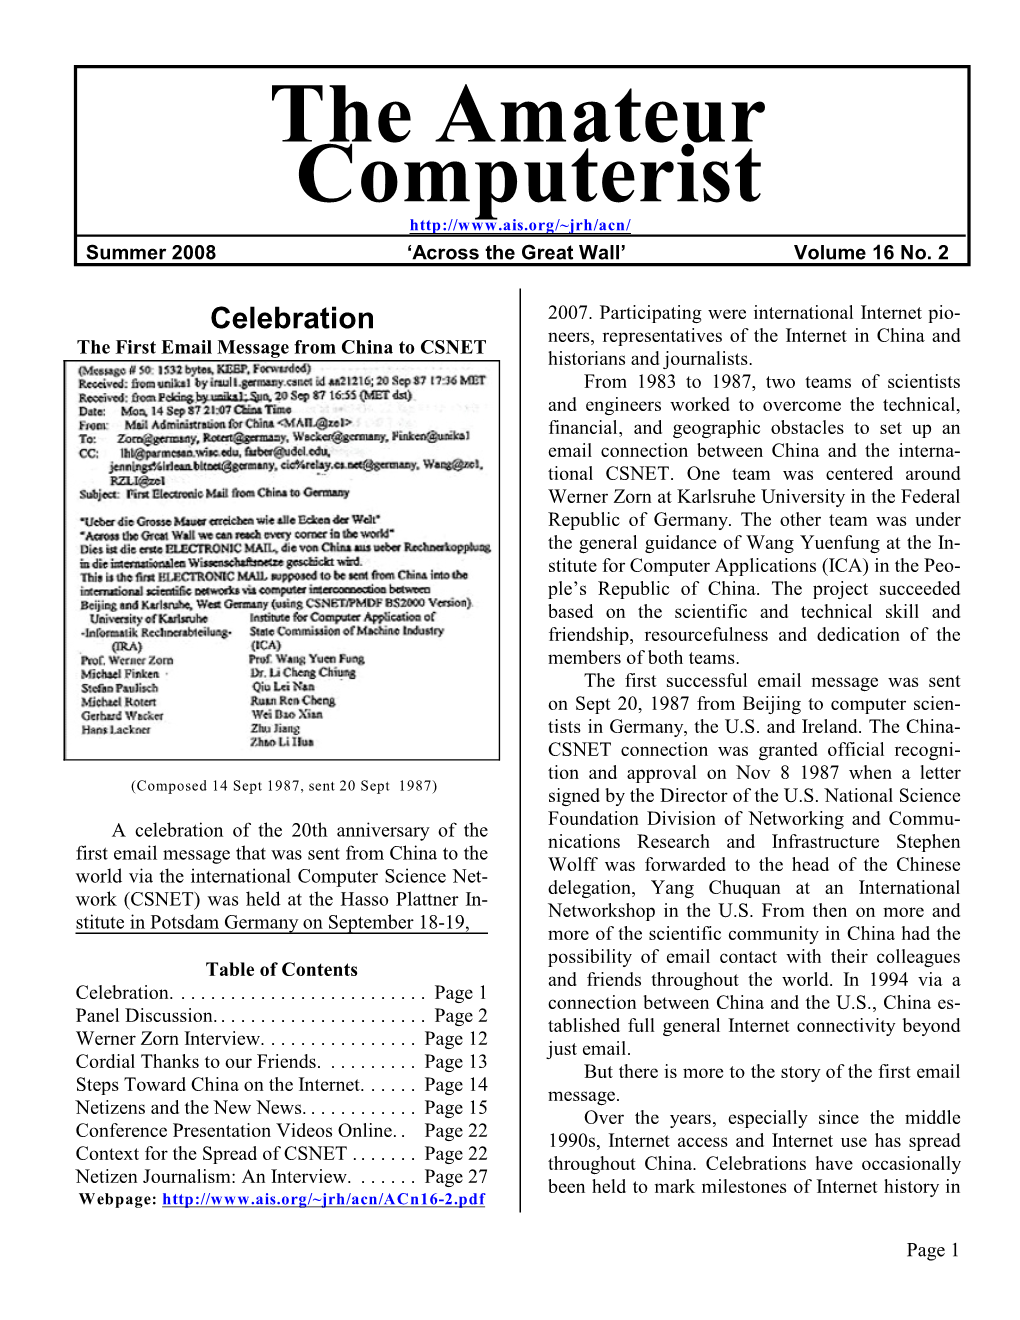 The Amateur Computerist Gathers an Article Was Written and Published in the Some Documents from That Celebration